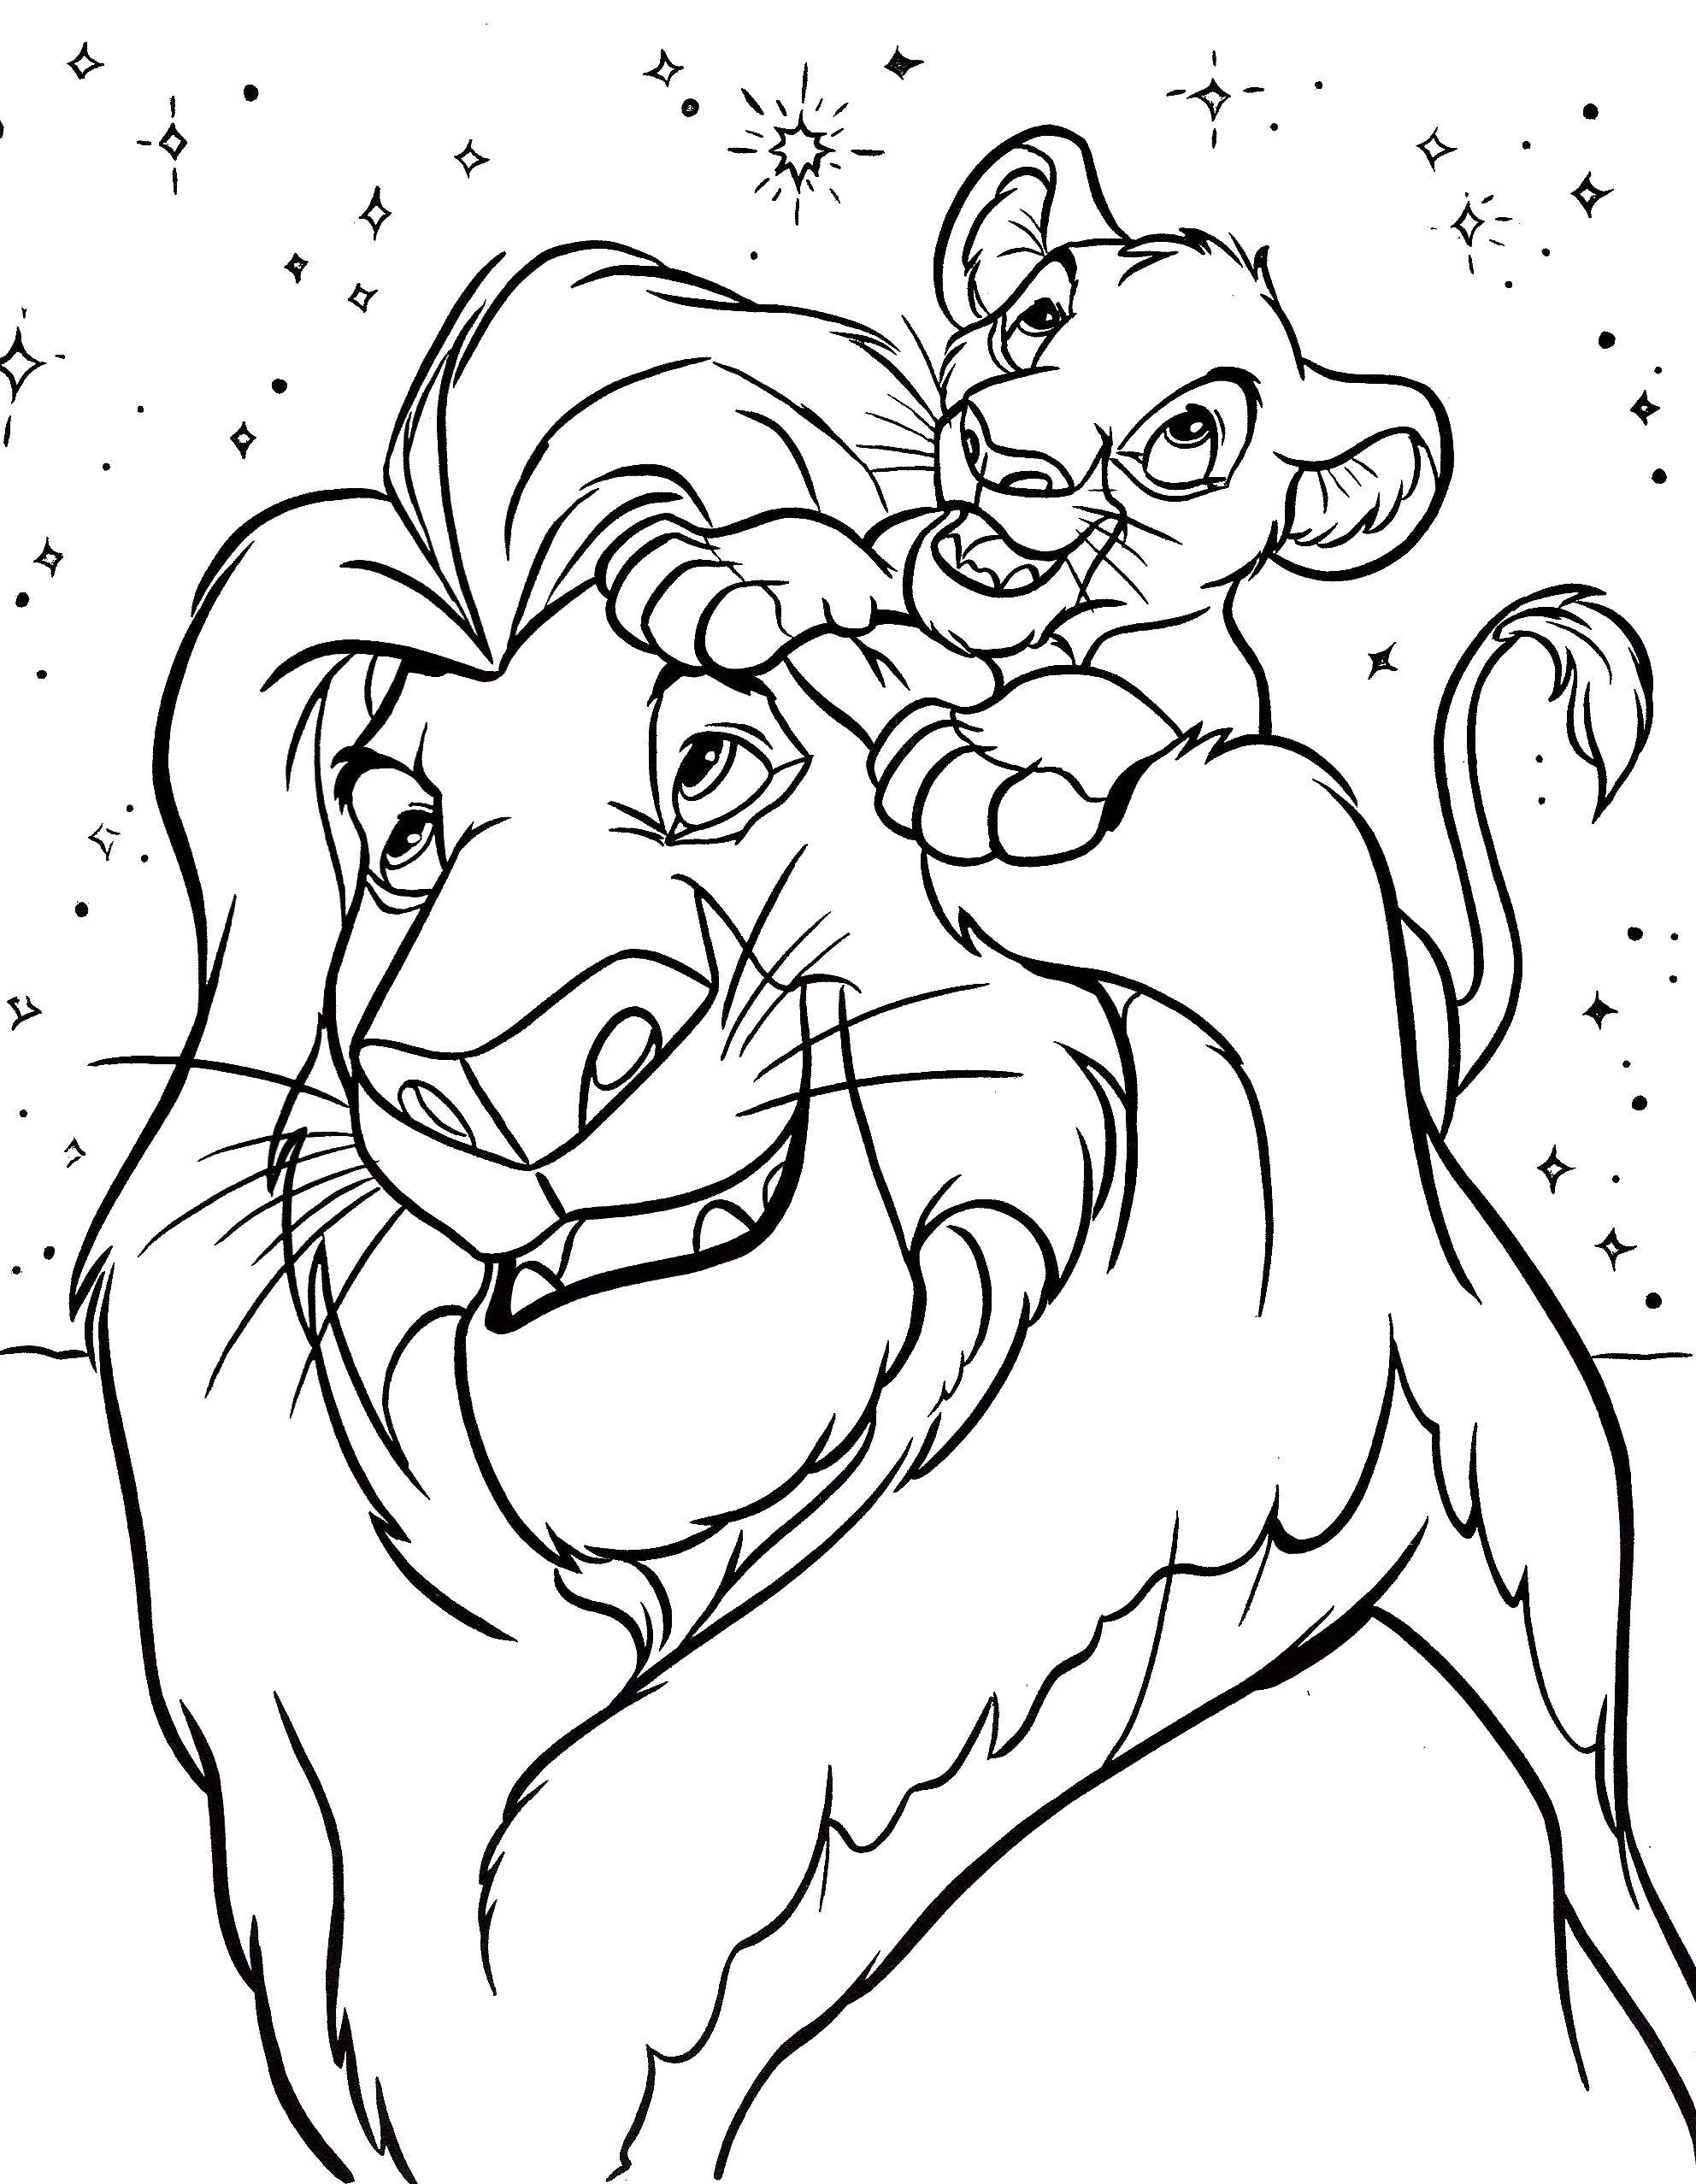 Coloring Mufasa and Simba. Category The lion king. Tags:  lion king cartoon.